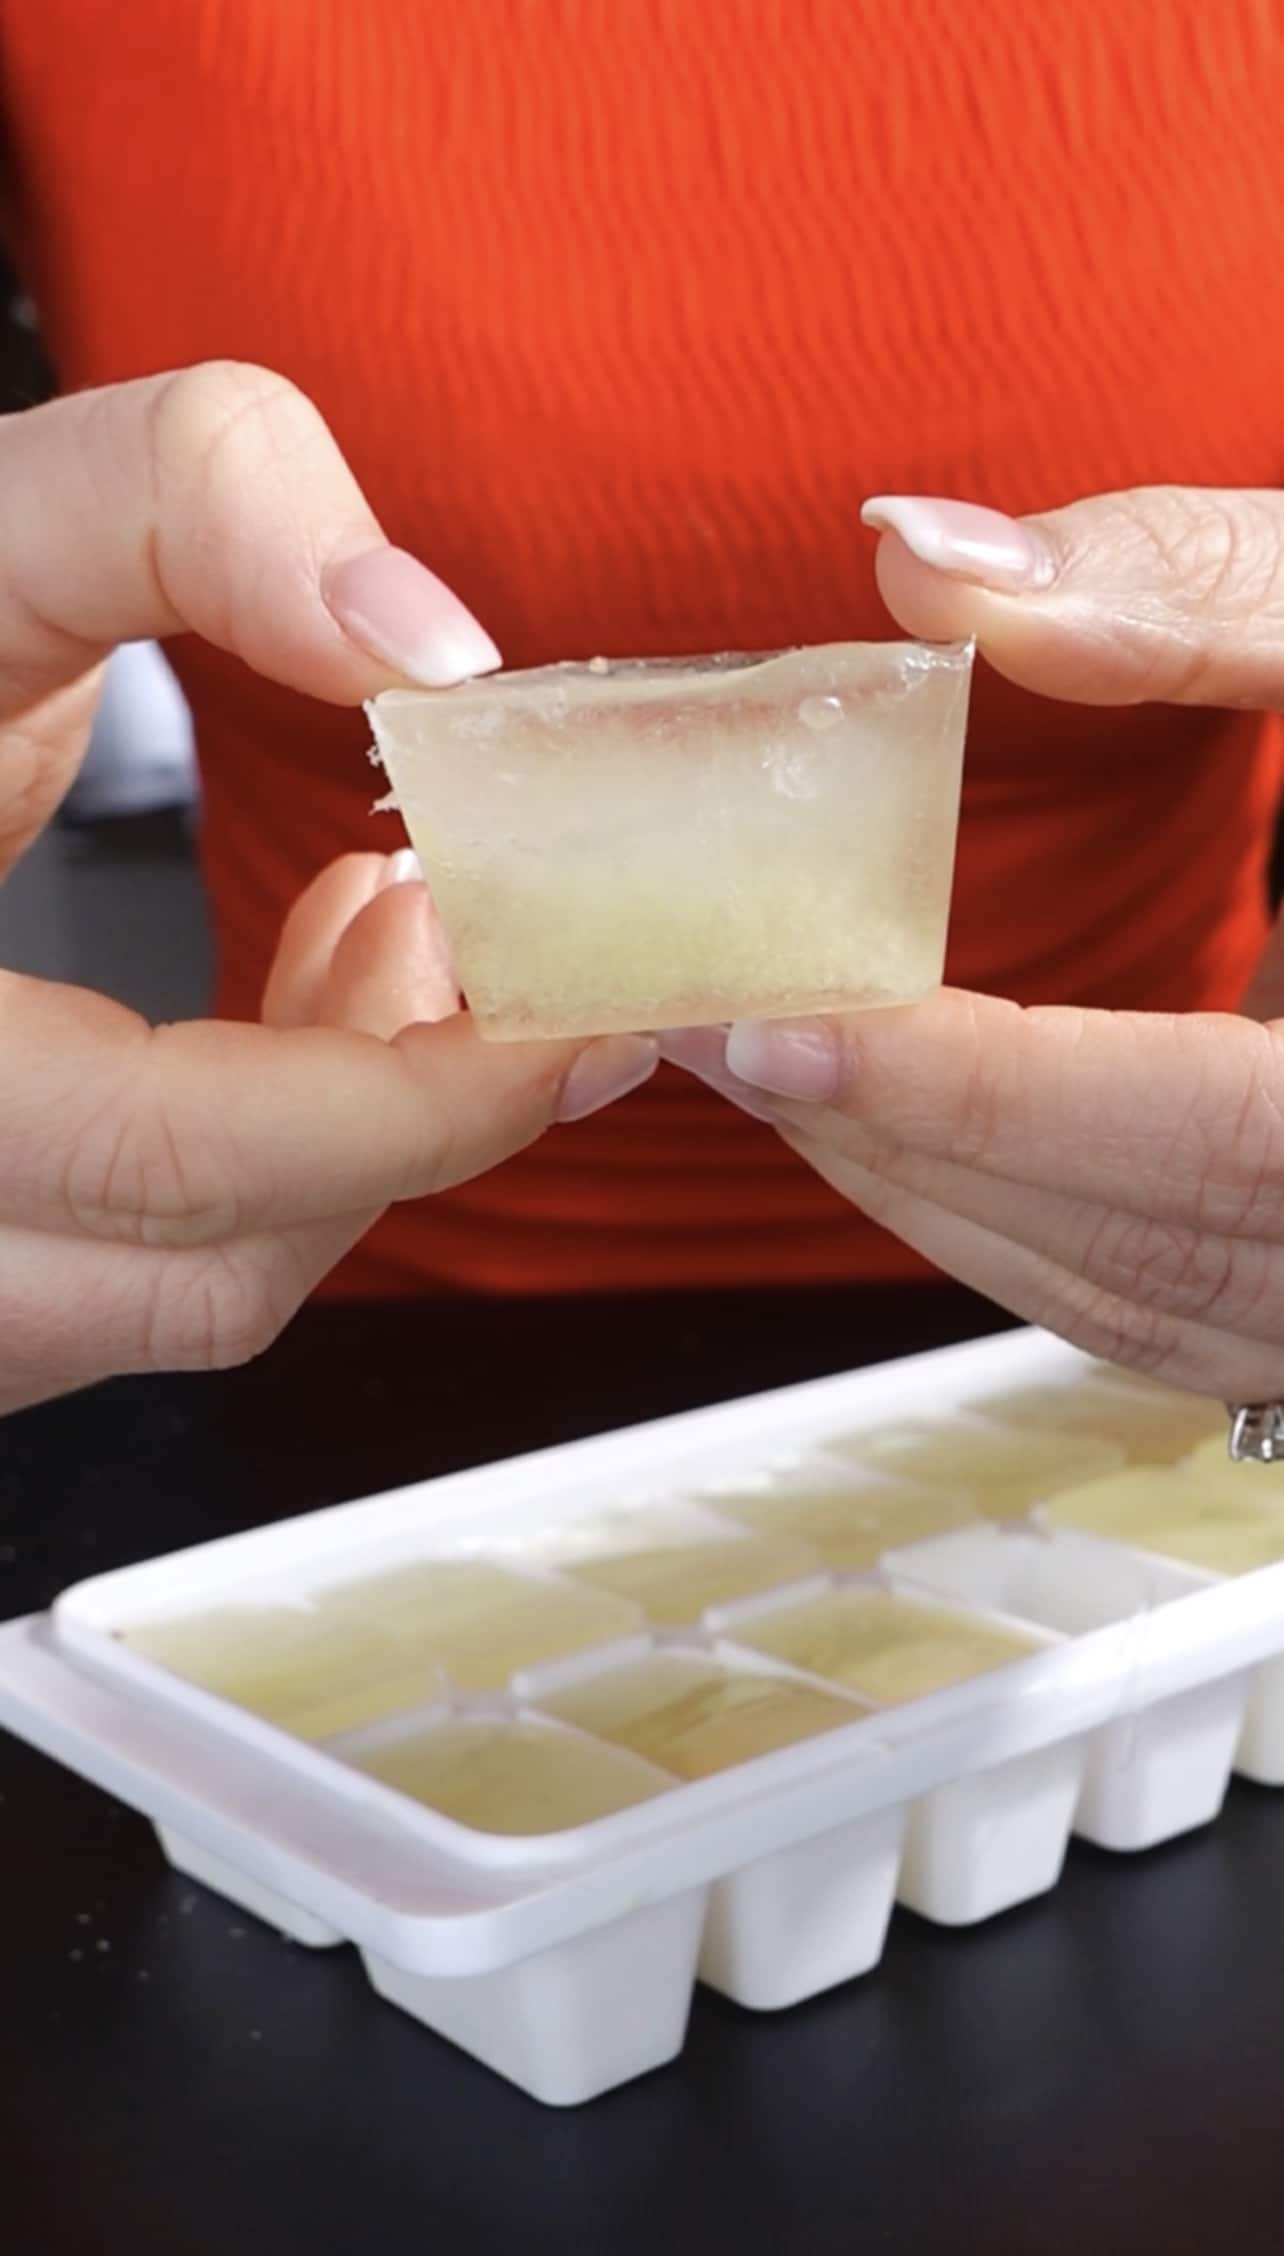 Hot Water May Be The Secret To Freezing Ice Cubes In Under An Hour